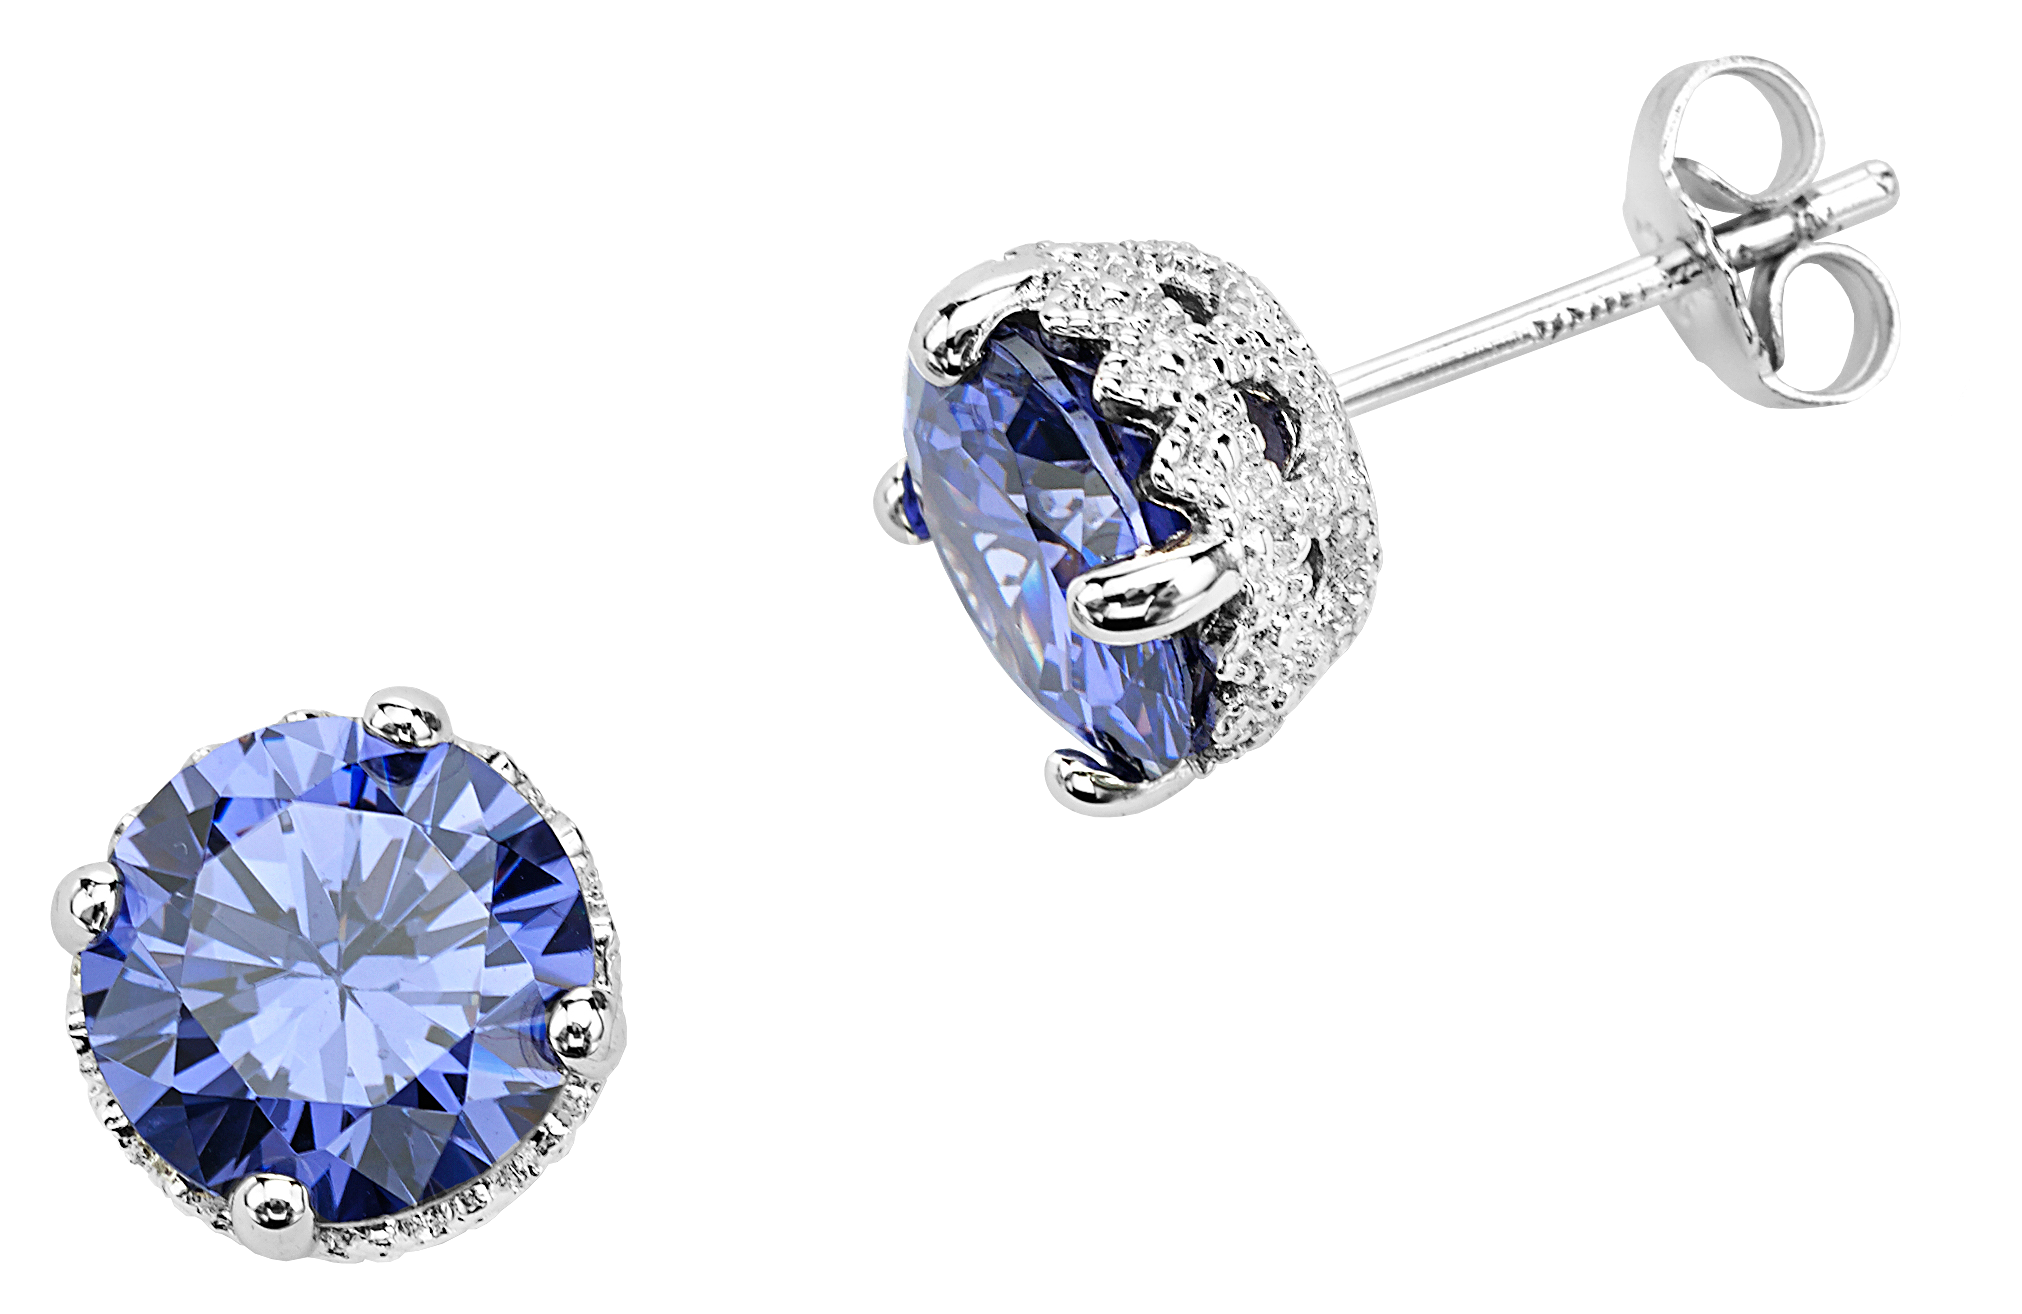 TR Jewelry Concepts Silver Elegance 8mm Round Tanzanite Cubic Zirconia Sterling Silver Post Earrings